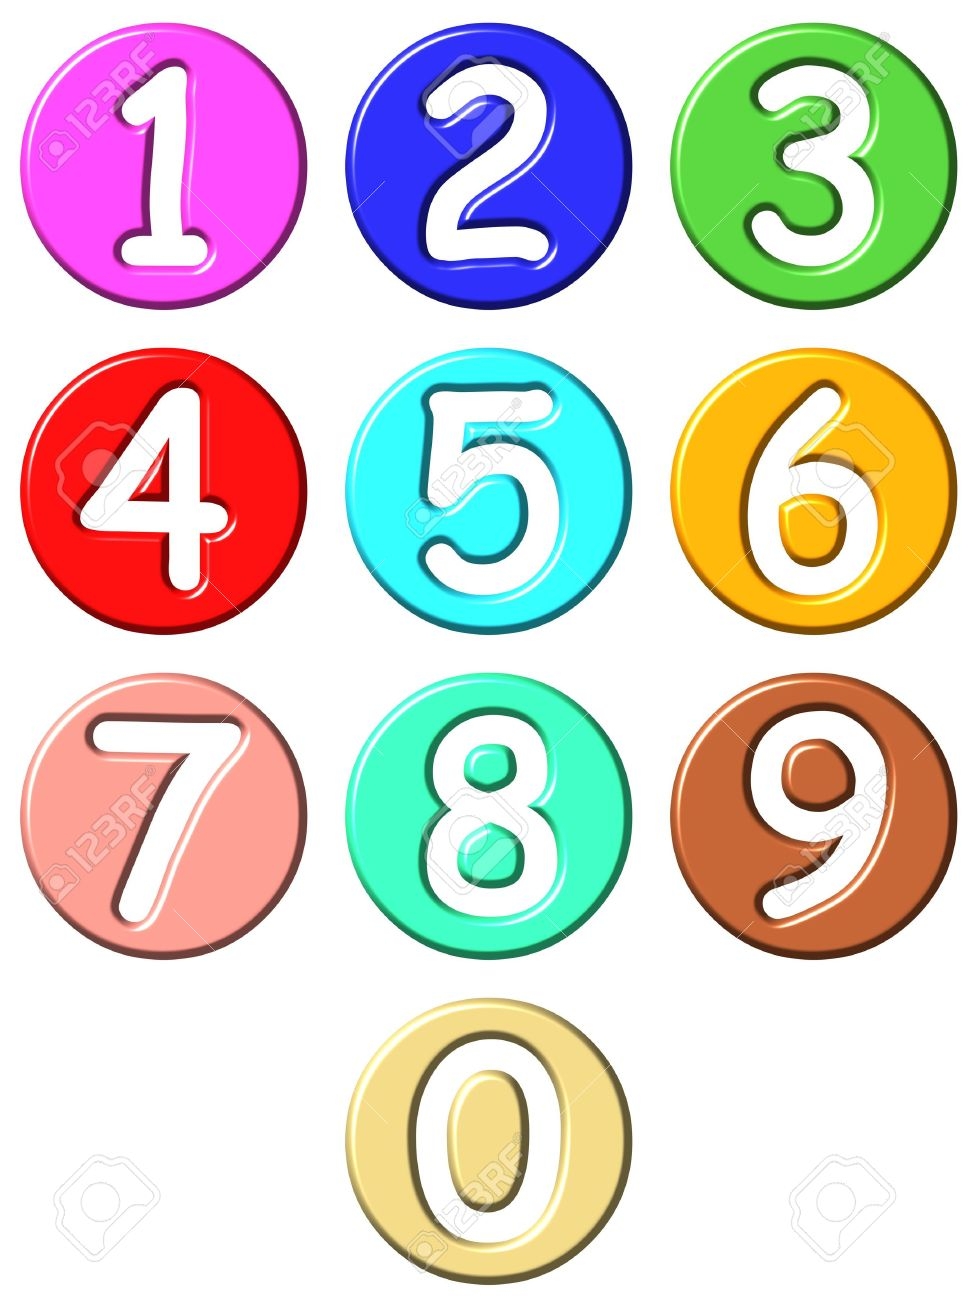 Clipart Of Numbers - ClipArt Best - ClipArt Best